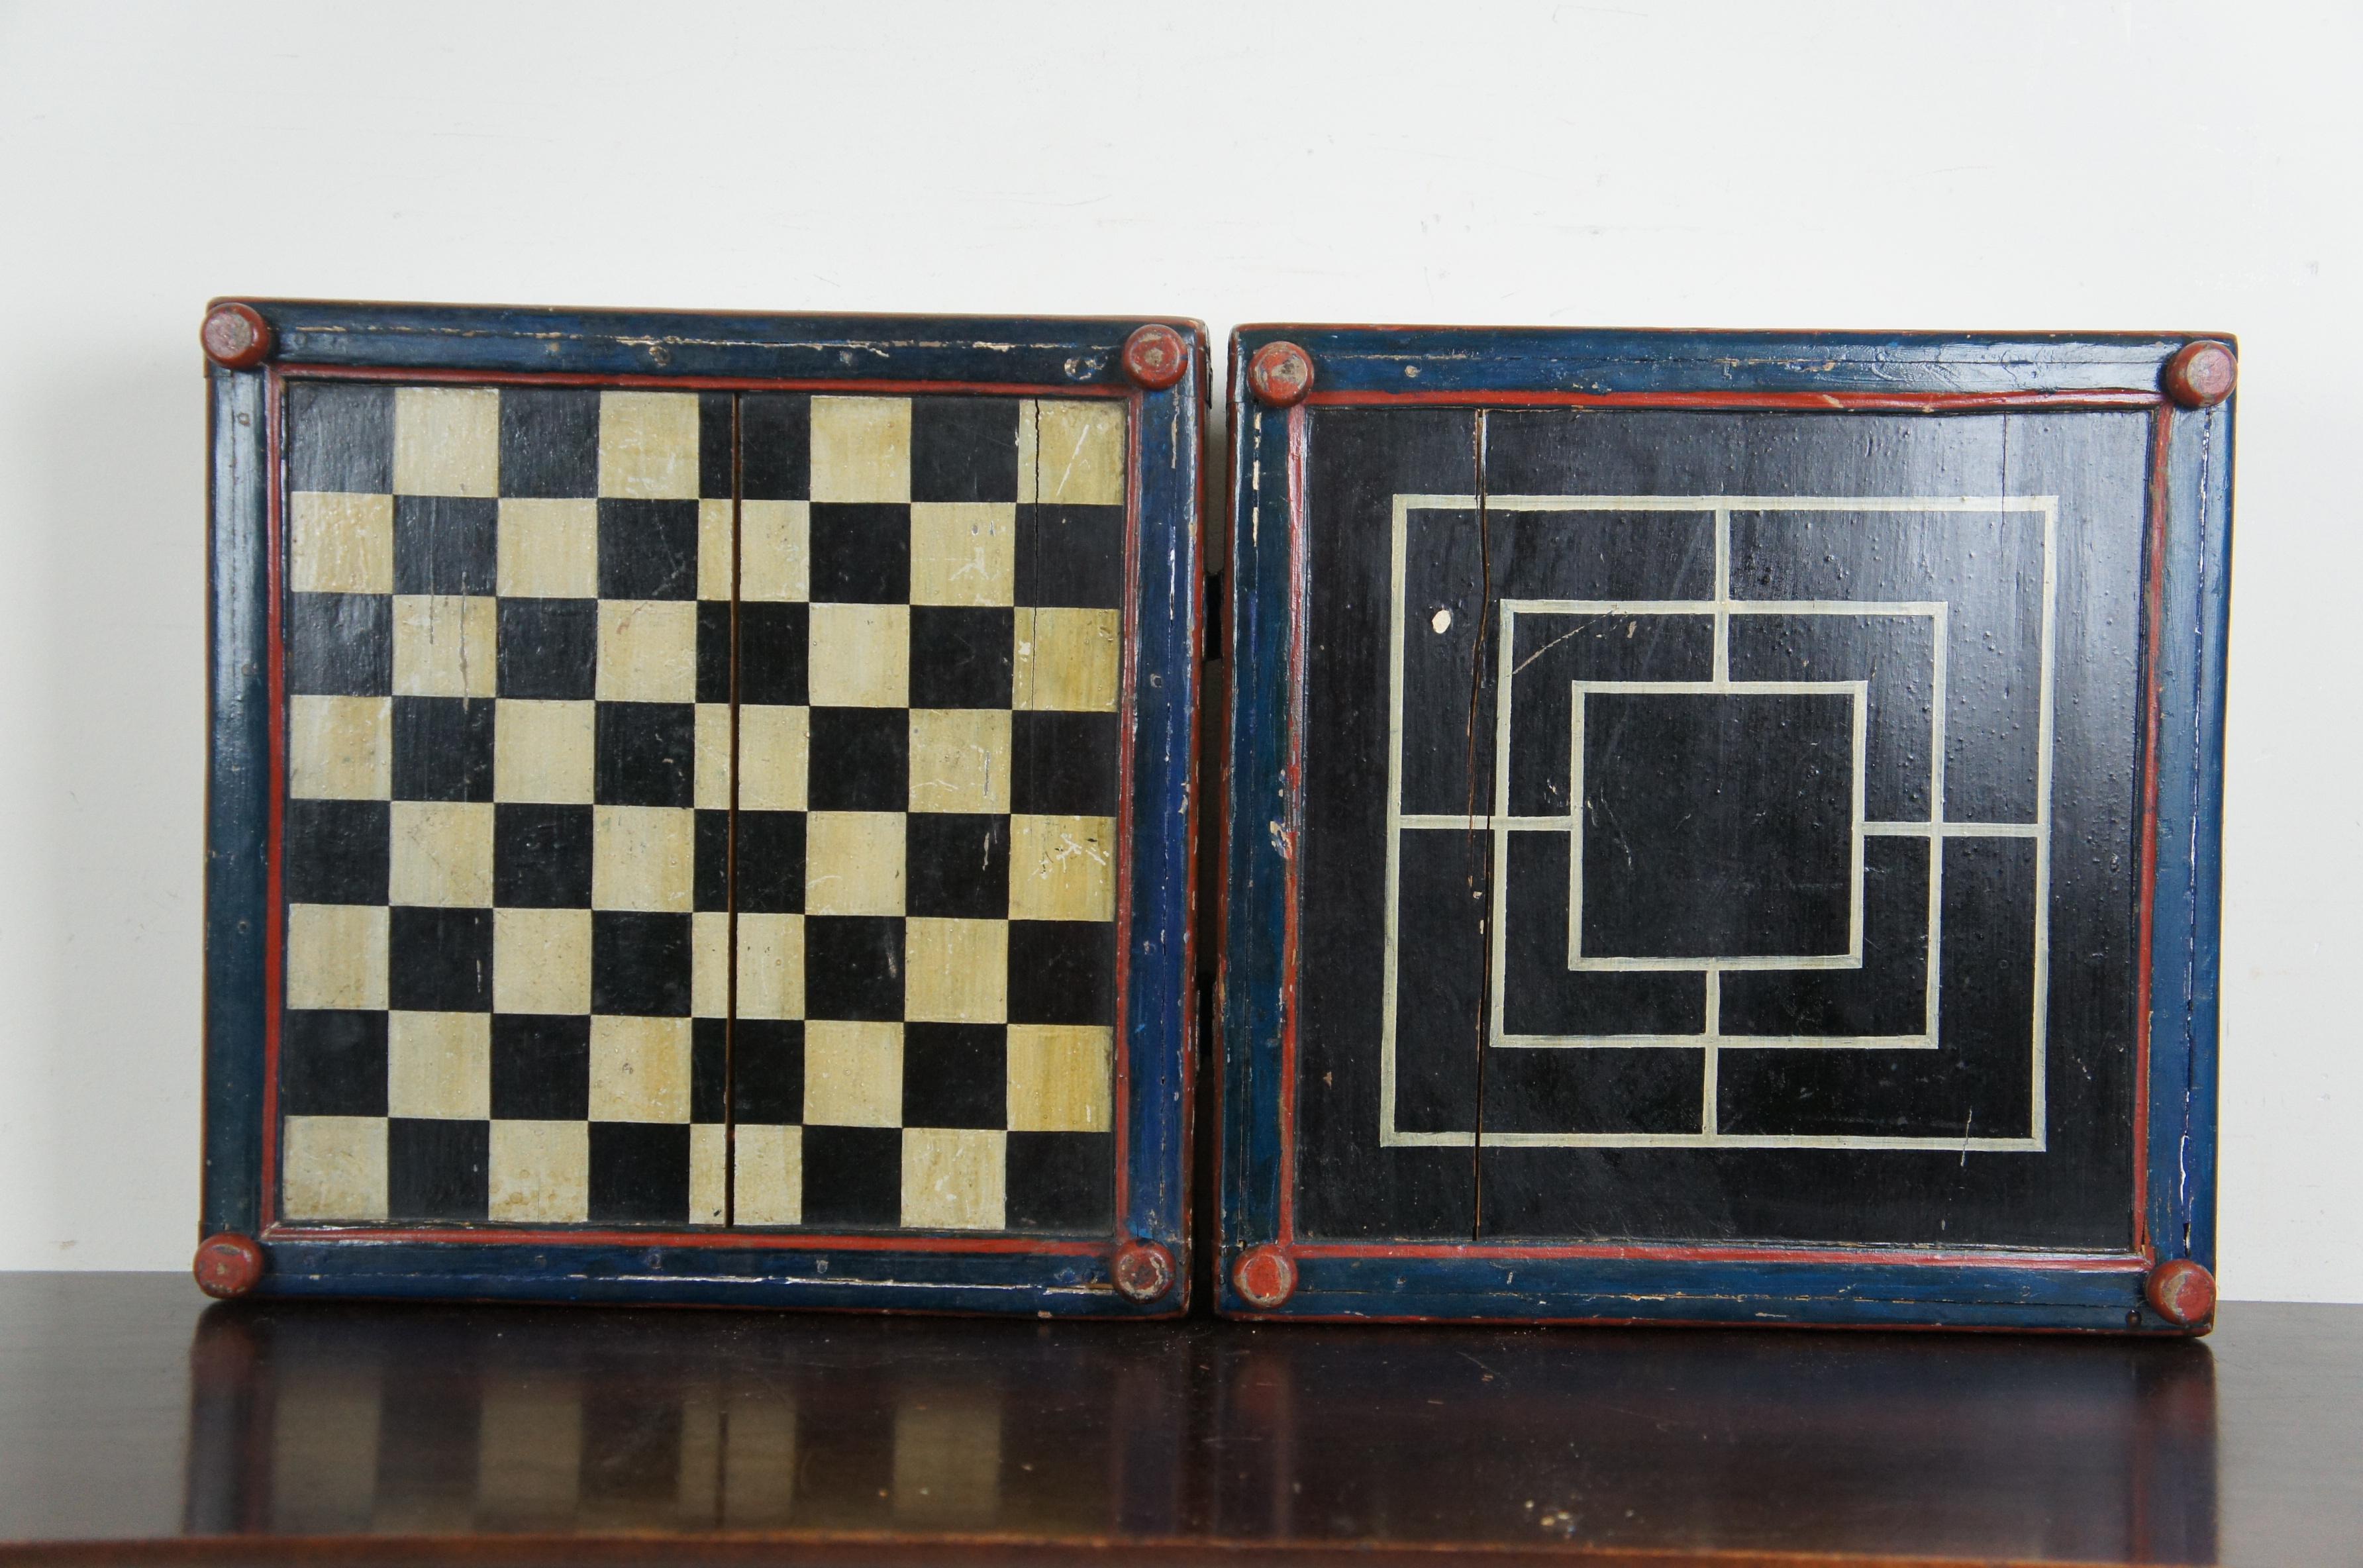 1817 Antique Painted Chess Backgammon Checkers Game Board Folk Art Primitive In Good Condition In Dayton, OH